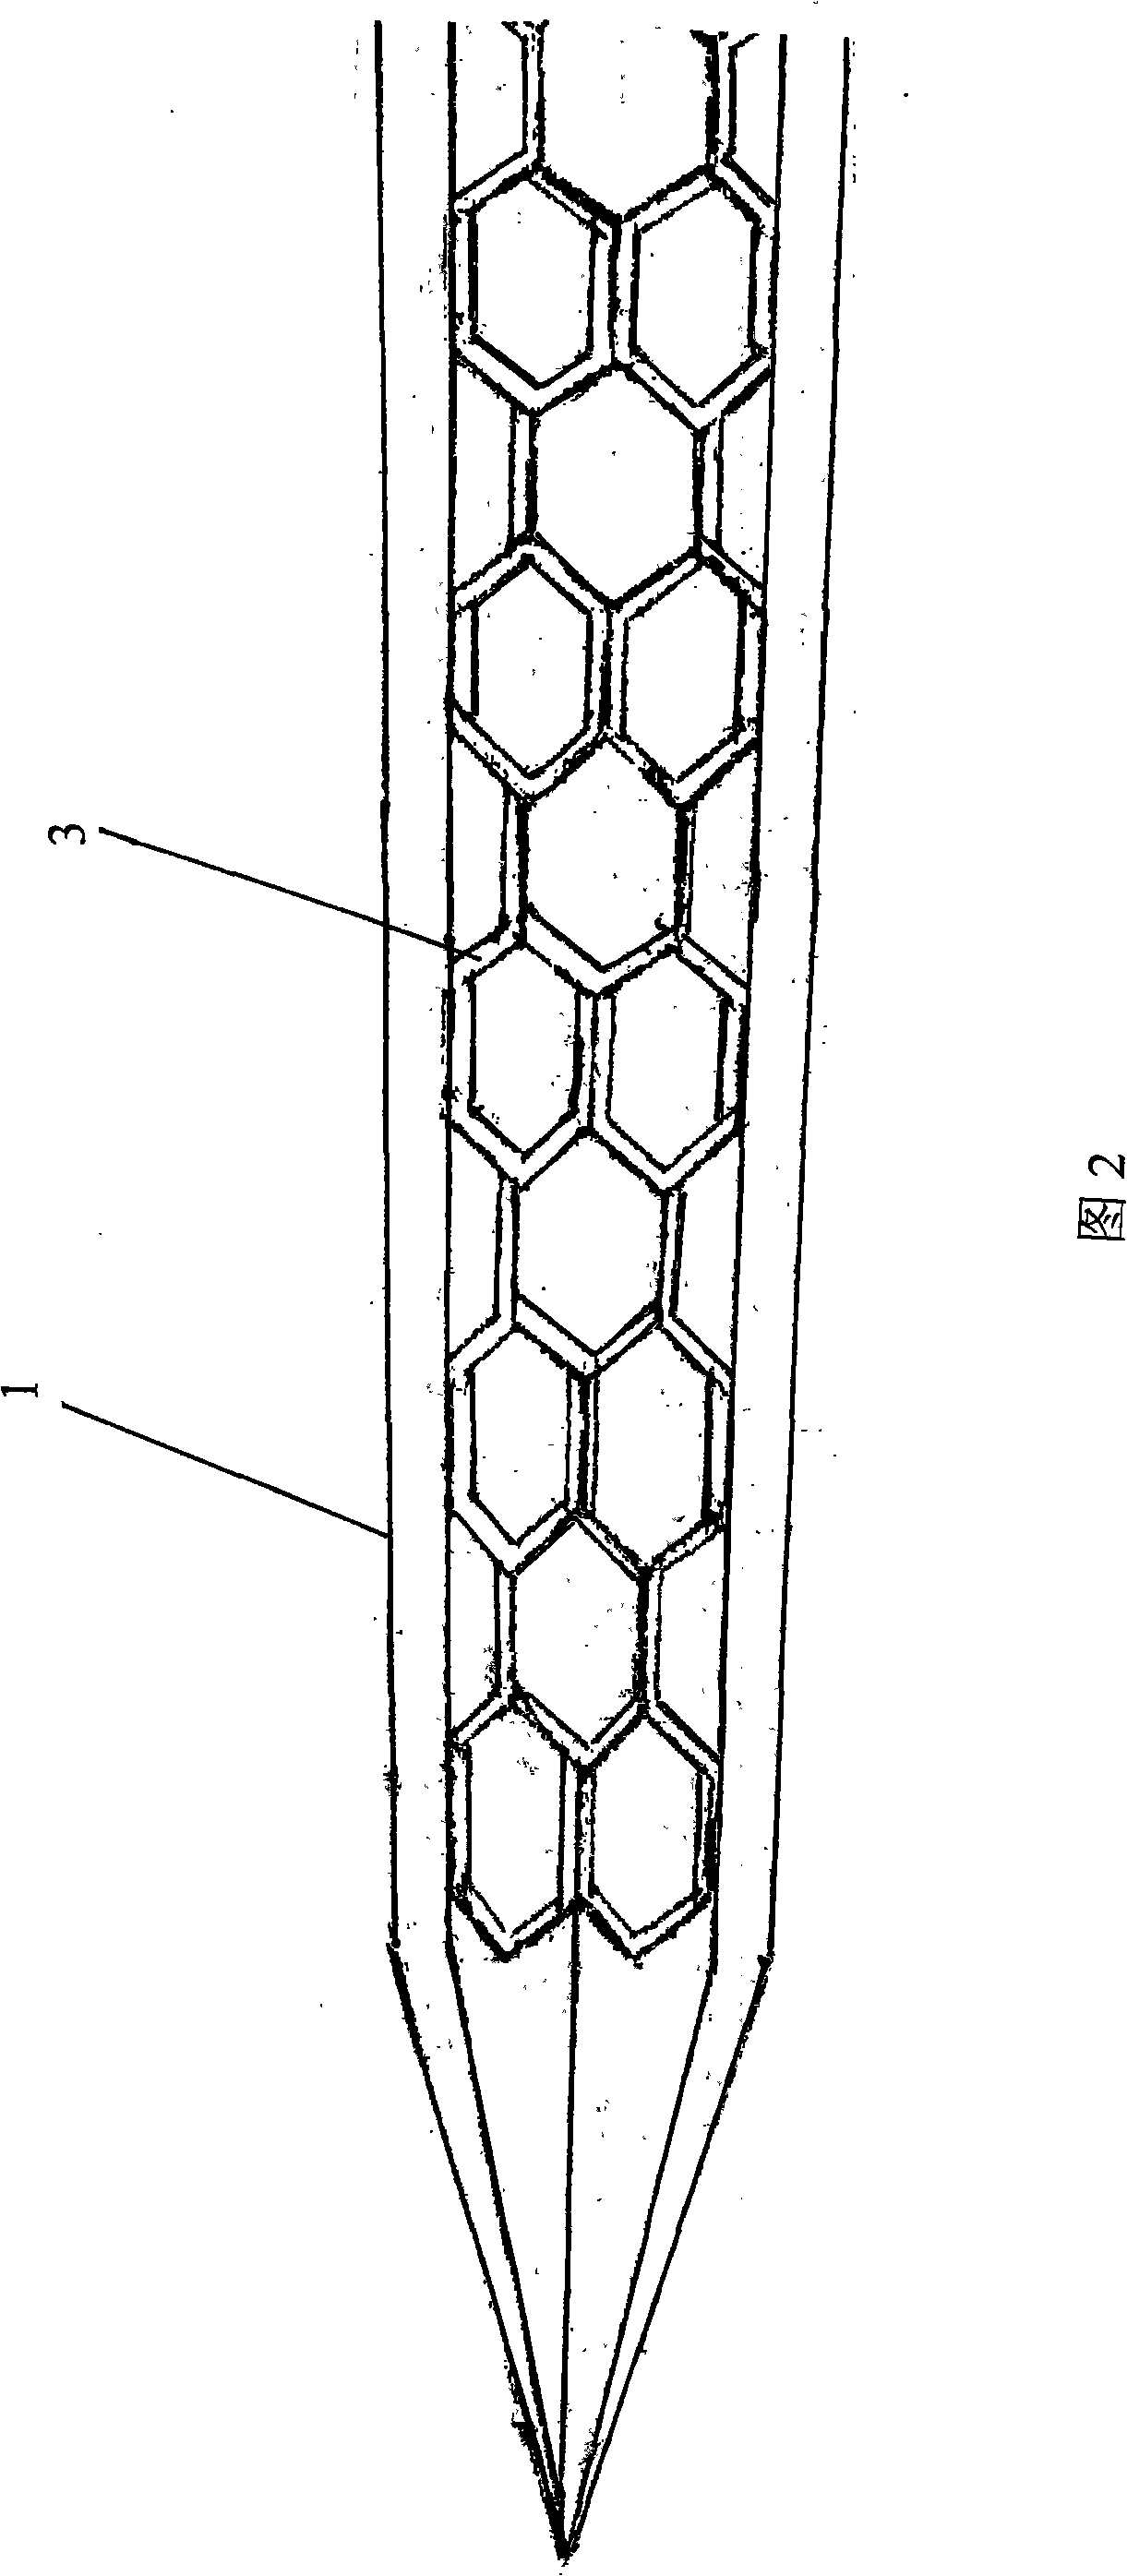 Method of forming pattern using second casting using different metal